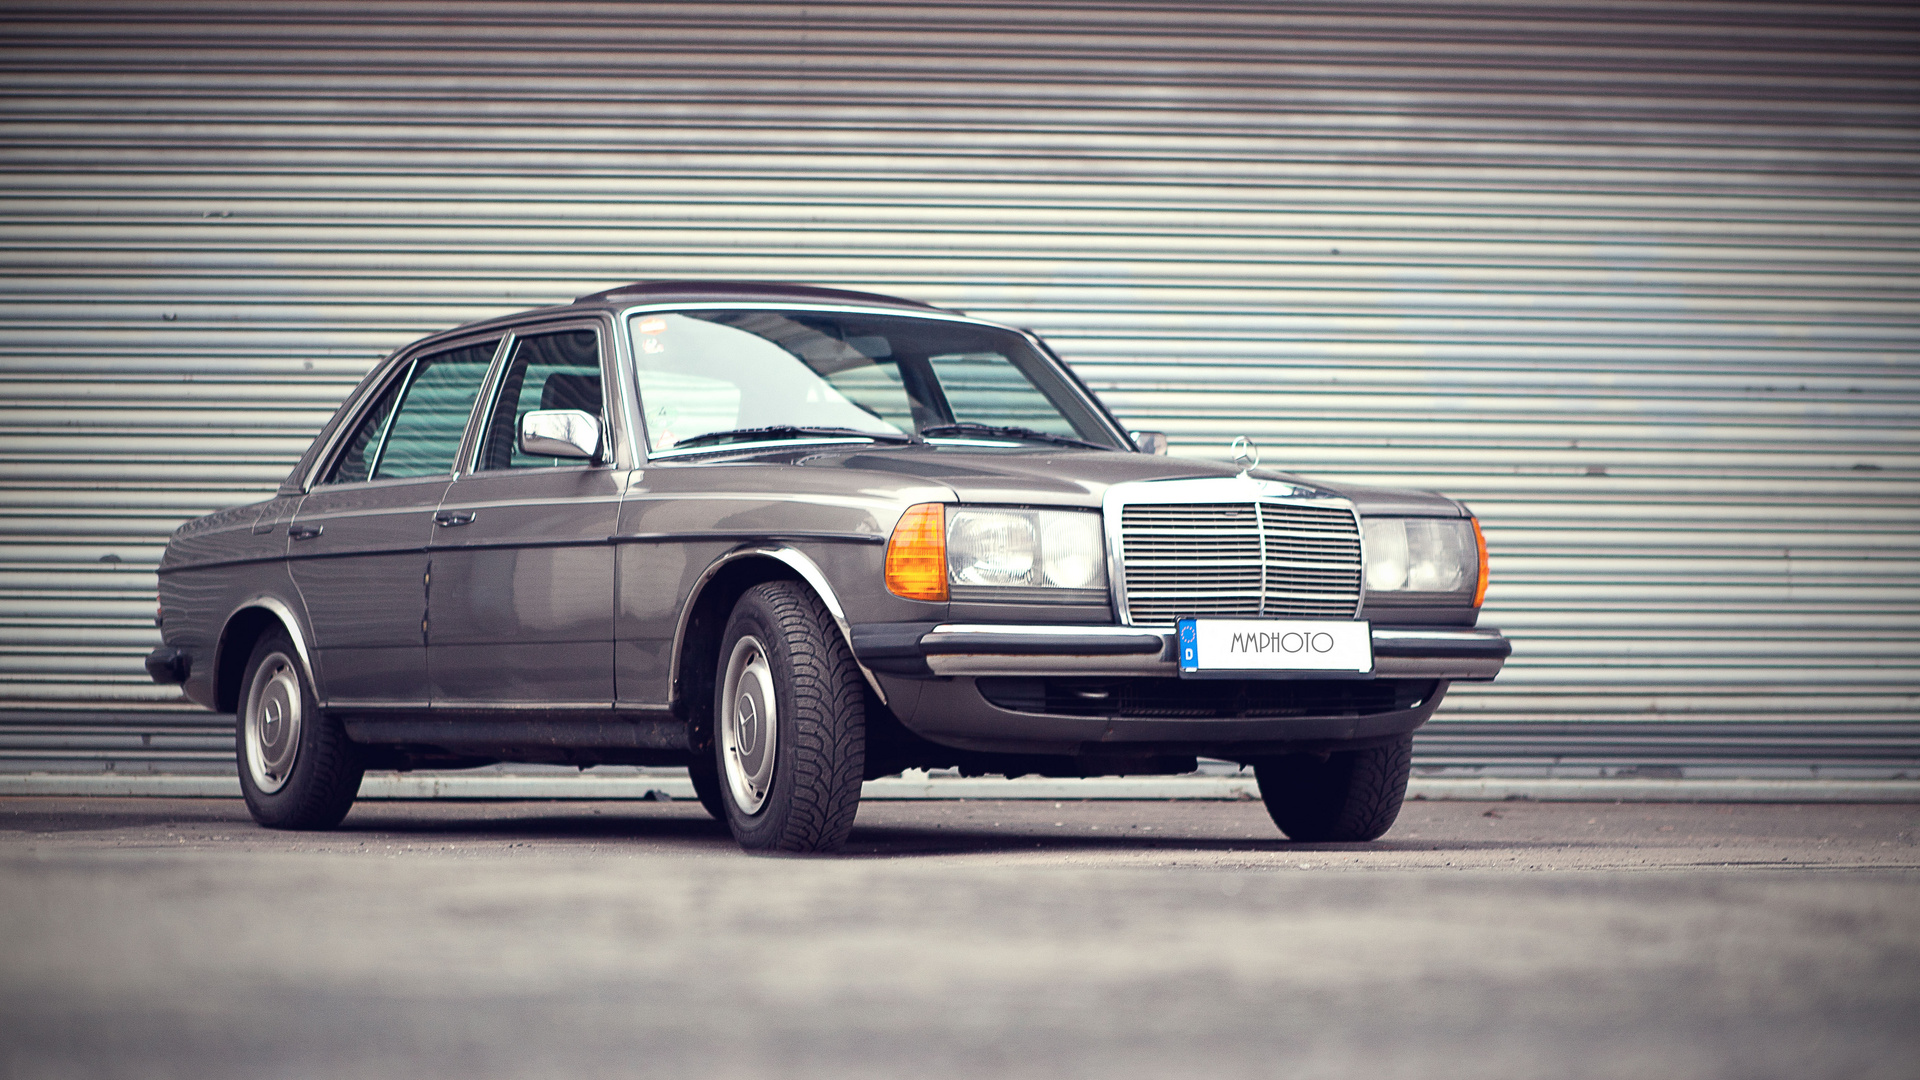 The old Mercedes......